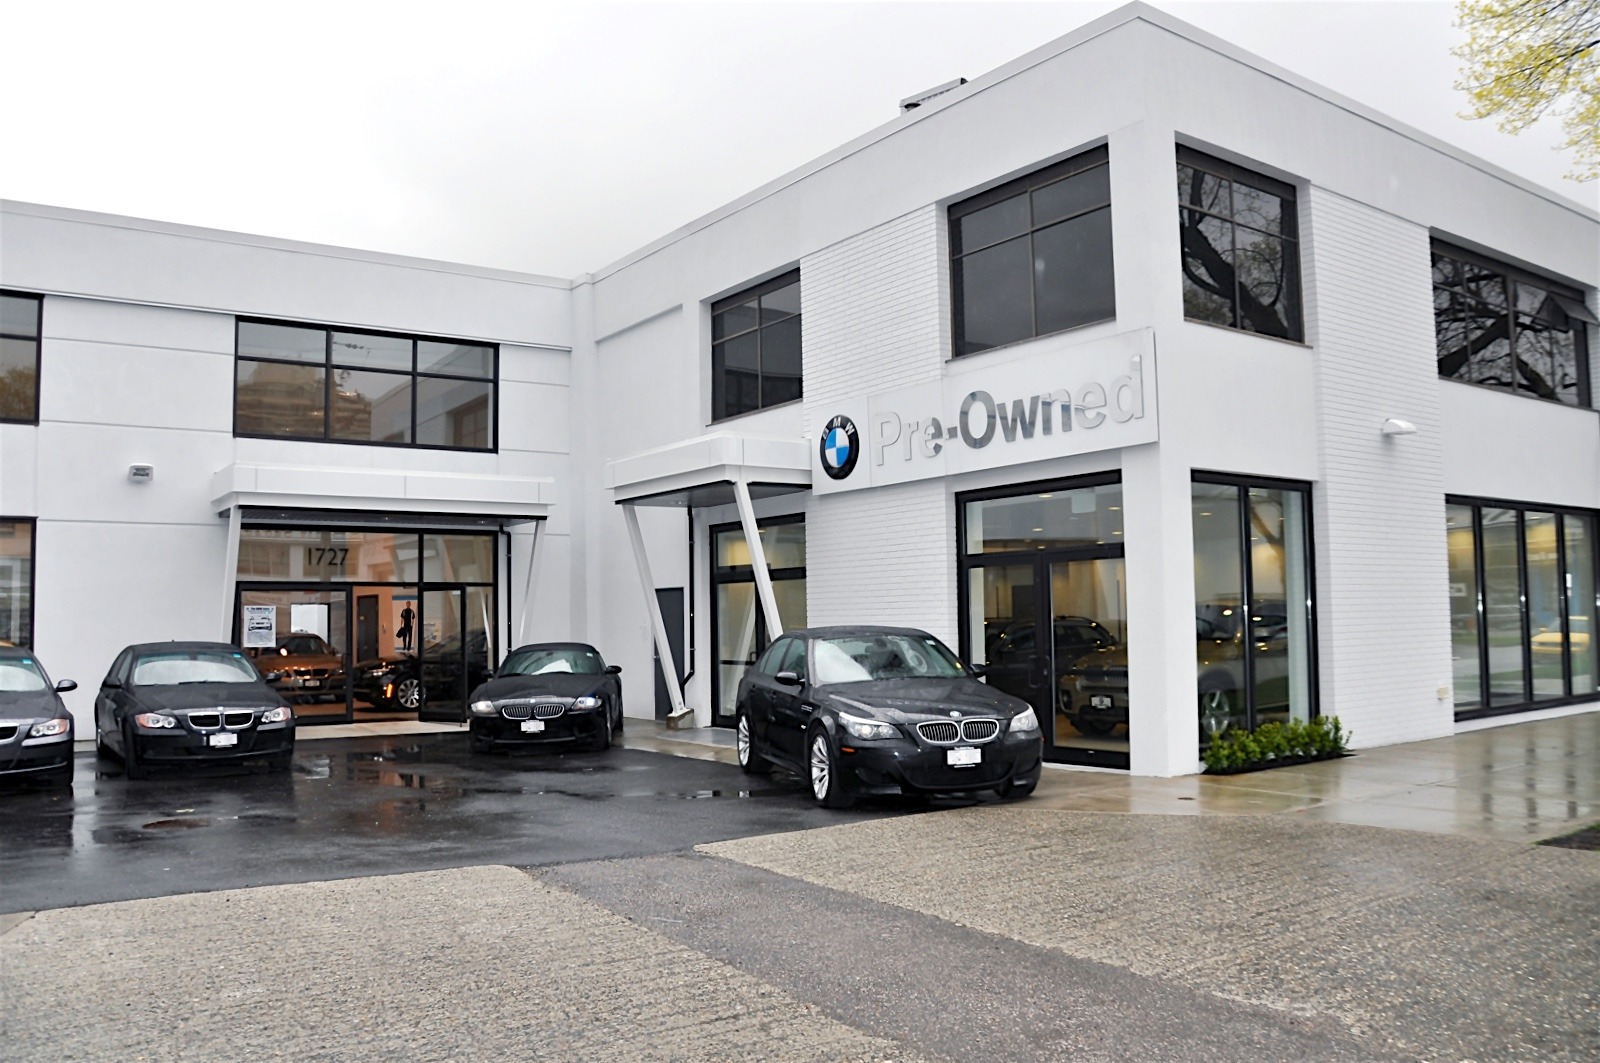 Robertson-Walls-Ceilings-Completed-Projects-Luxury-Car-Dealerships-The-BMW-Store-2 THE BMW STORE